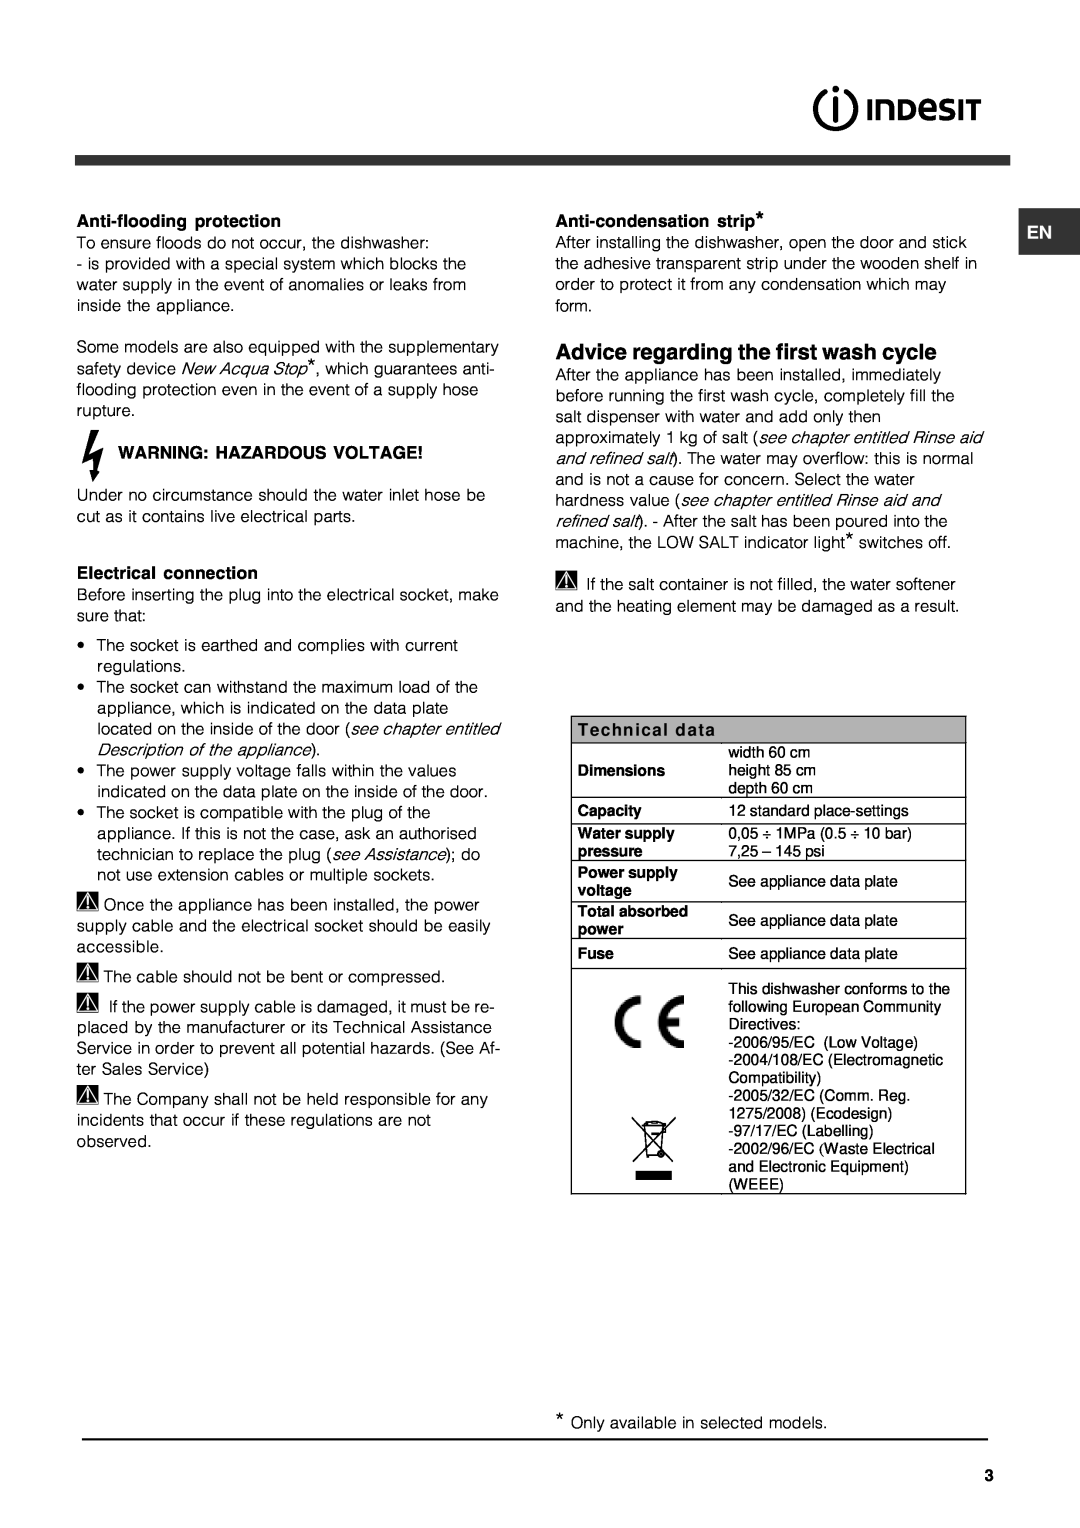 Indesit IDF 125 manual Advice regarding the first wash cycle, Technical data 